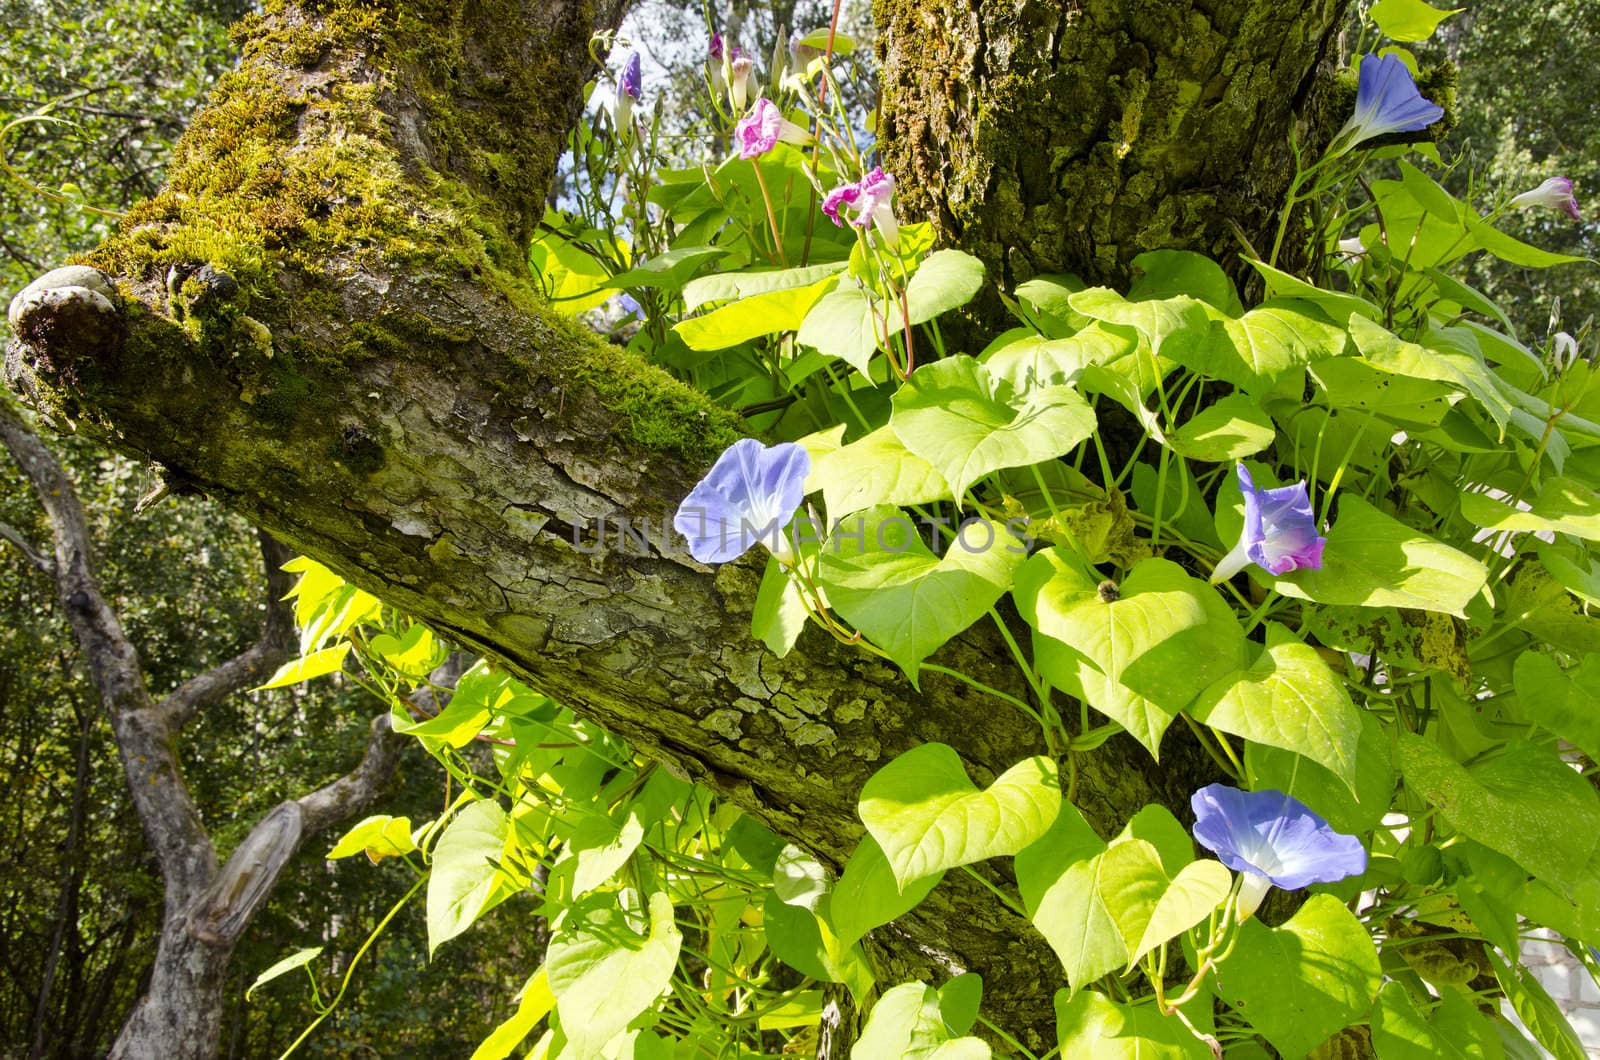 Blooming clematis flower creeper growing on an old apple tree trunk.